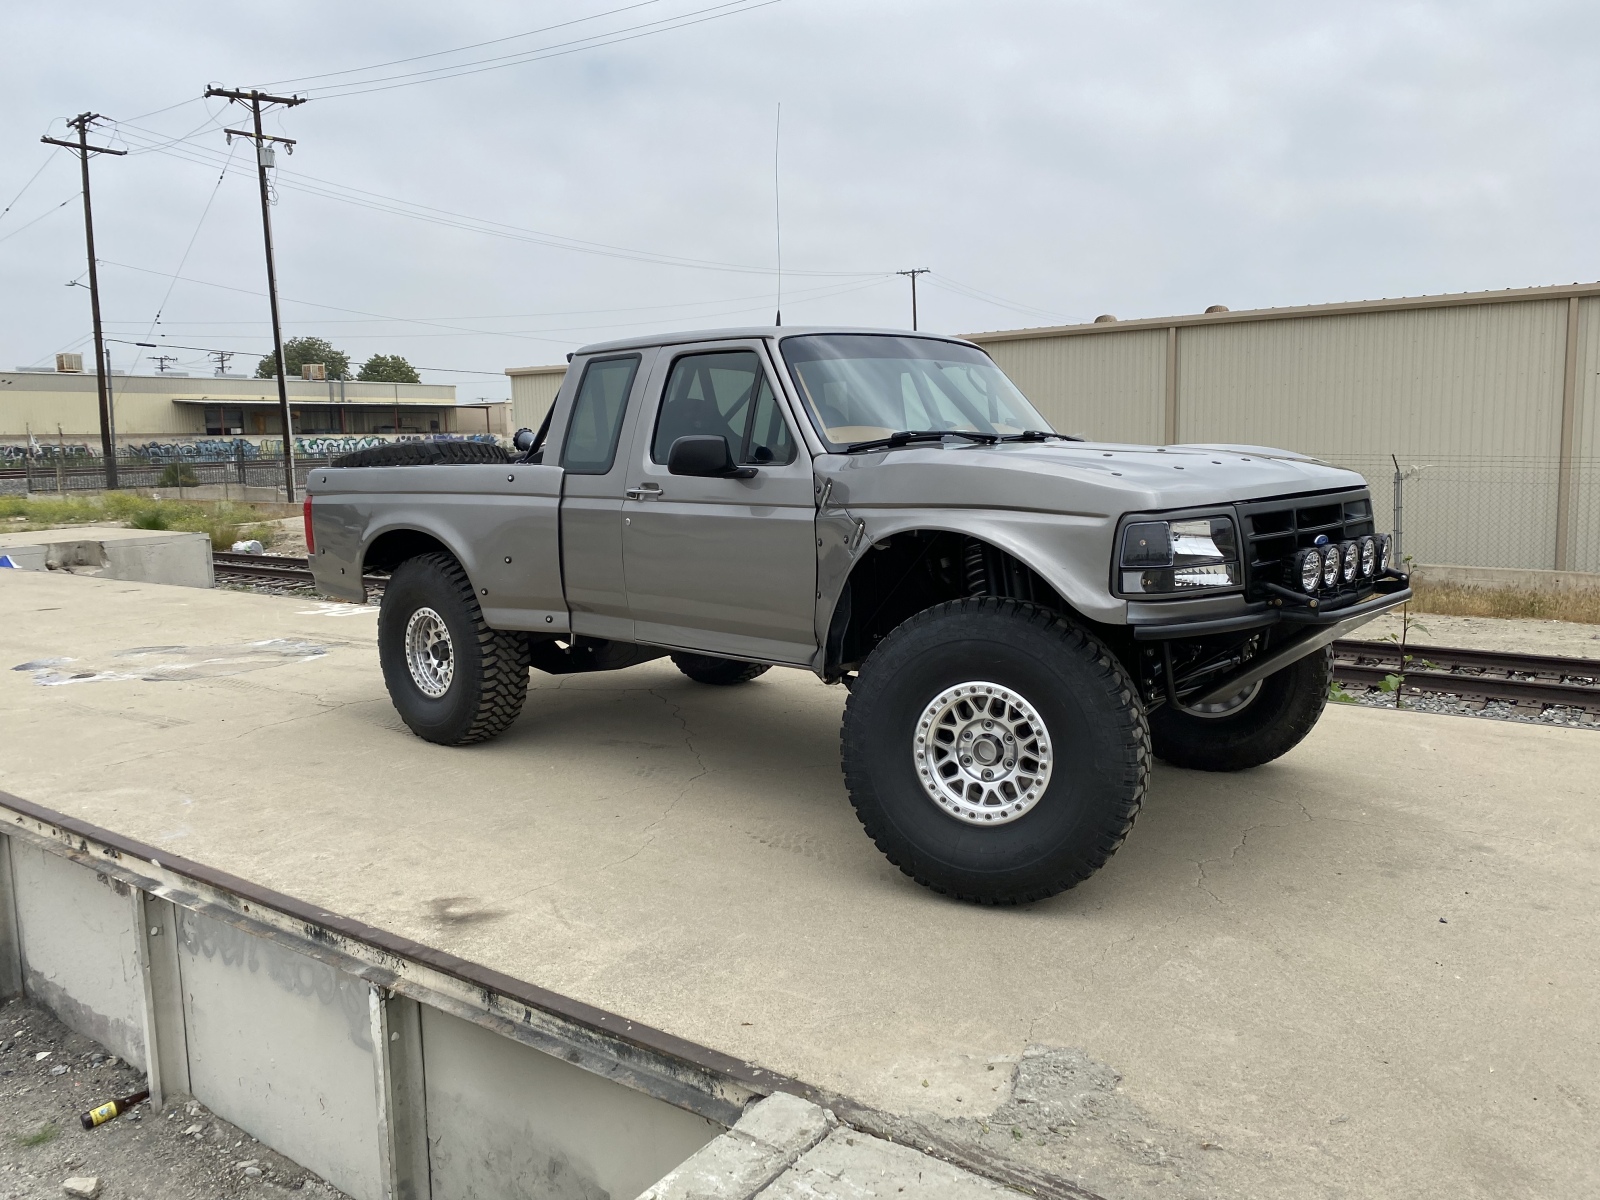 For Sale: OBS Ford F-150 Luxury Prerunner  - photo11